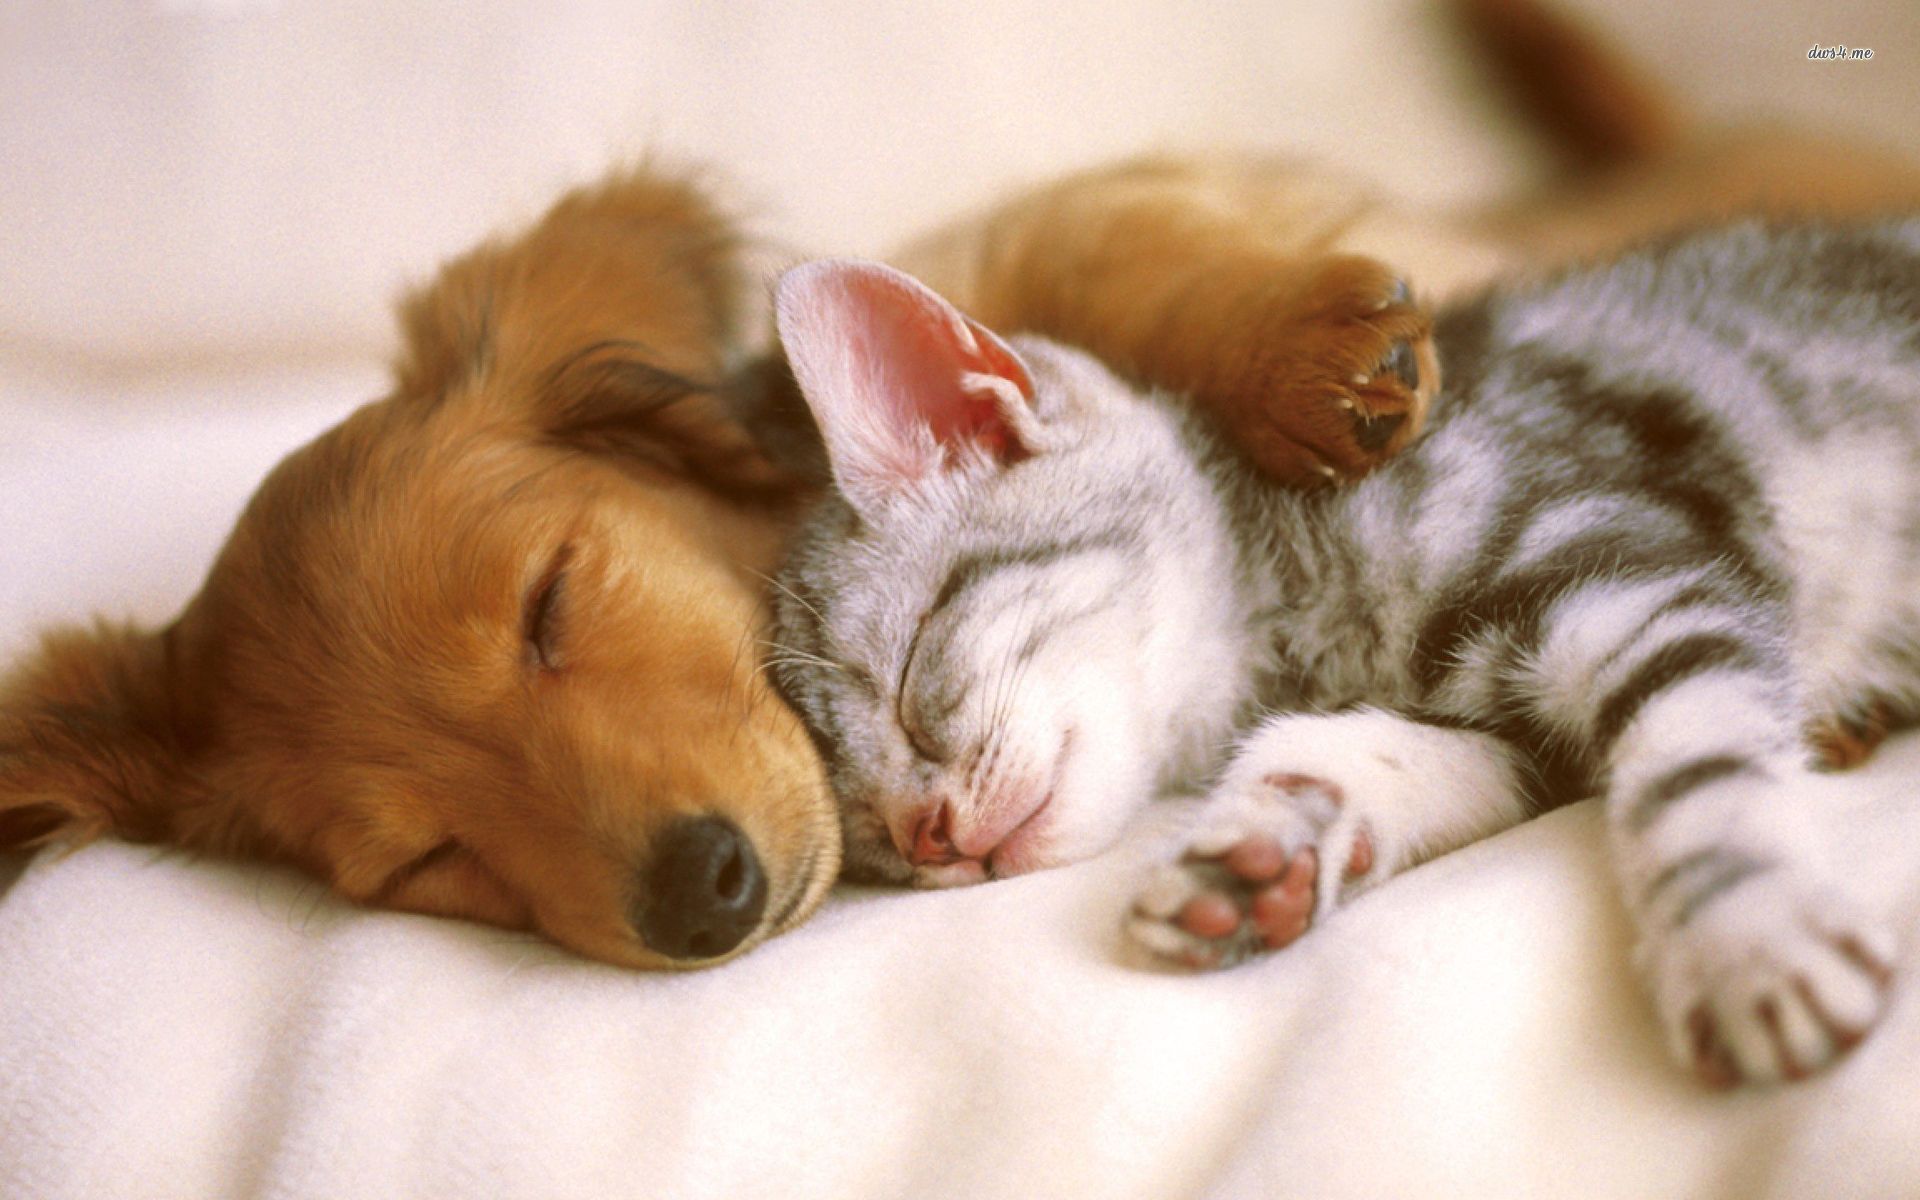 Cute Baby Puppies and Kittens Sleeping id 4186 - 7HDBackgrounds